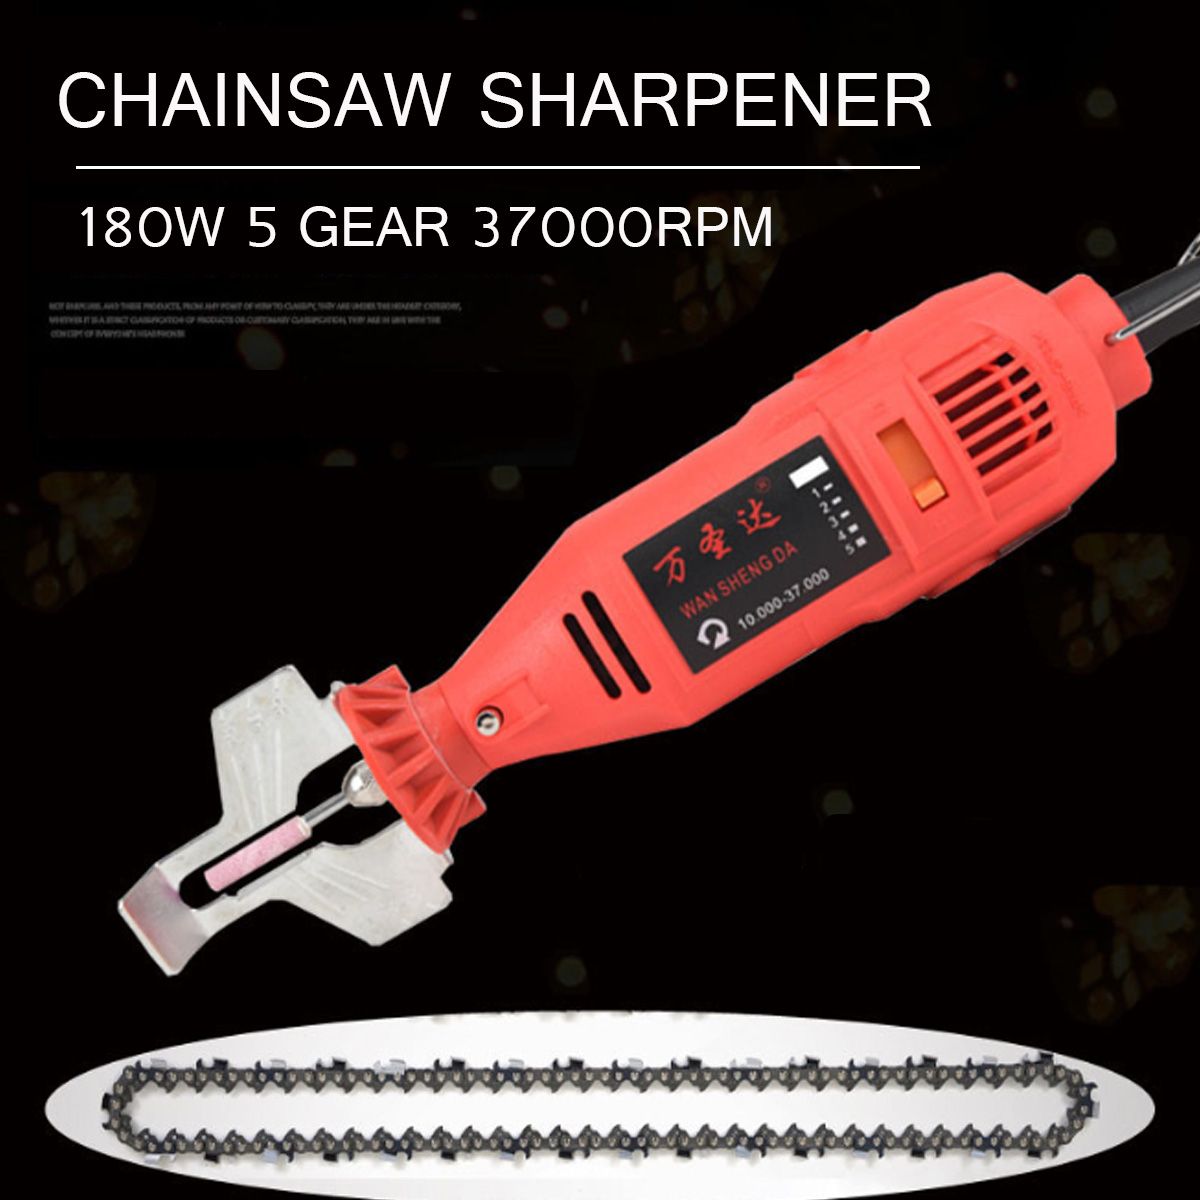 180W-5Speed-37000rpm-Power-Chain-Saw-Sharpener-Chainsaw-Electric-Grinder-Pro-Tools-1516539